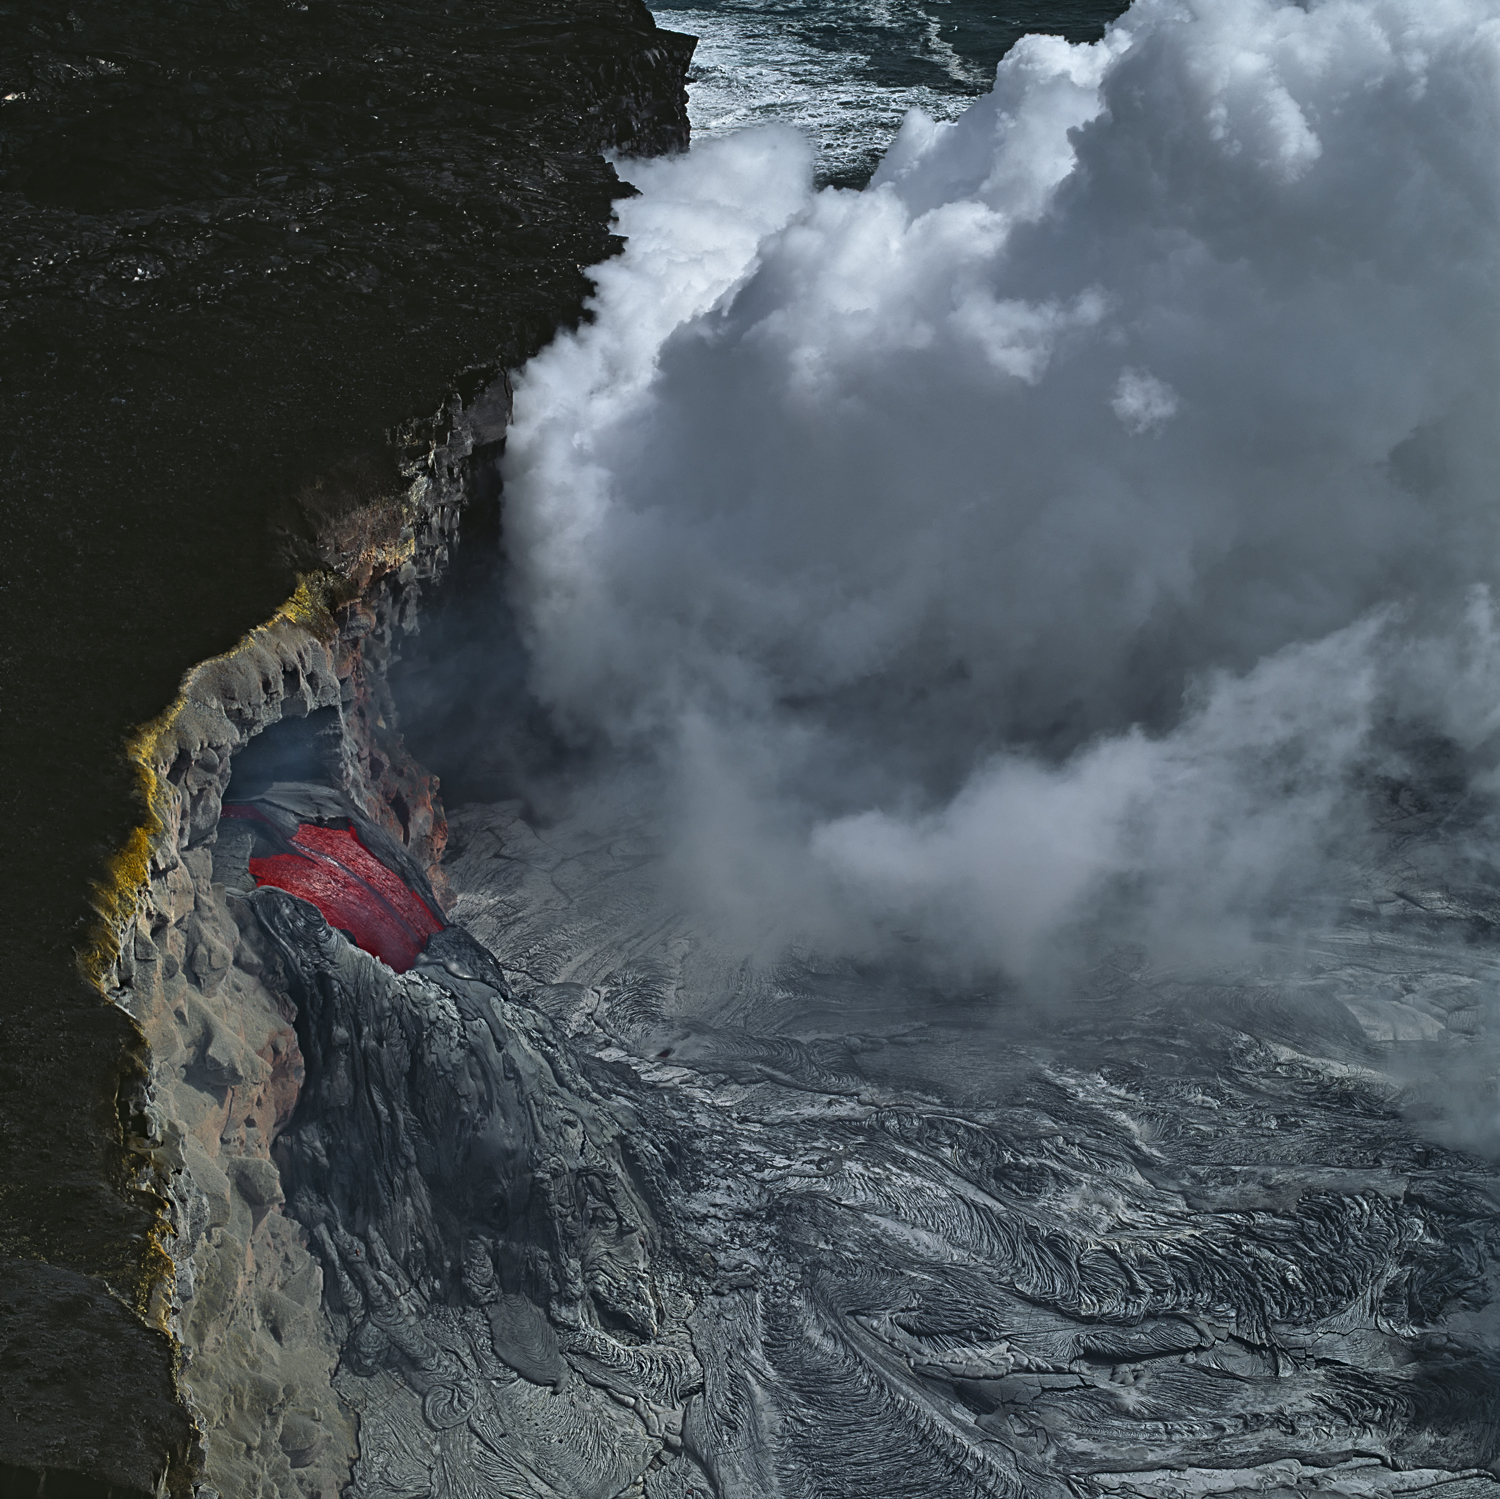 Red lava flowing down a craggy rockface from tunnels with steam clouds swirling around, Kilauea, Hawai’i 